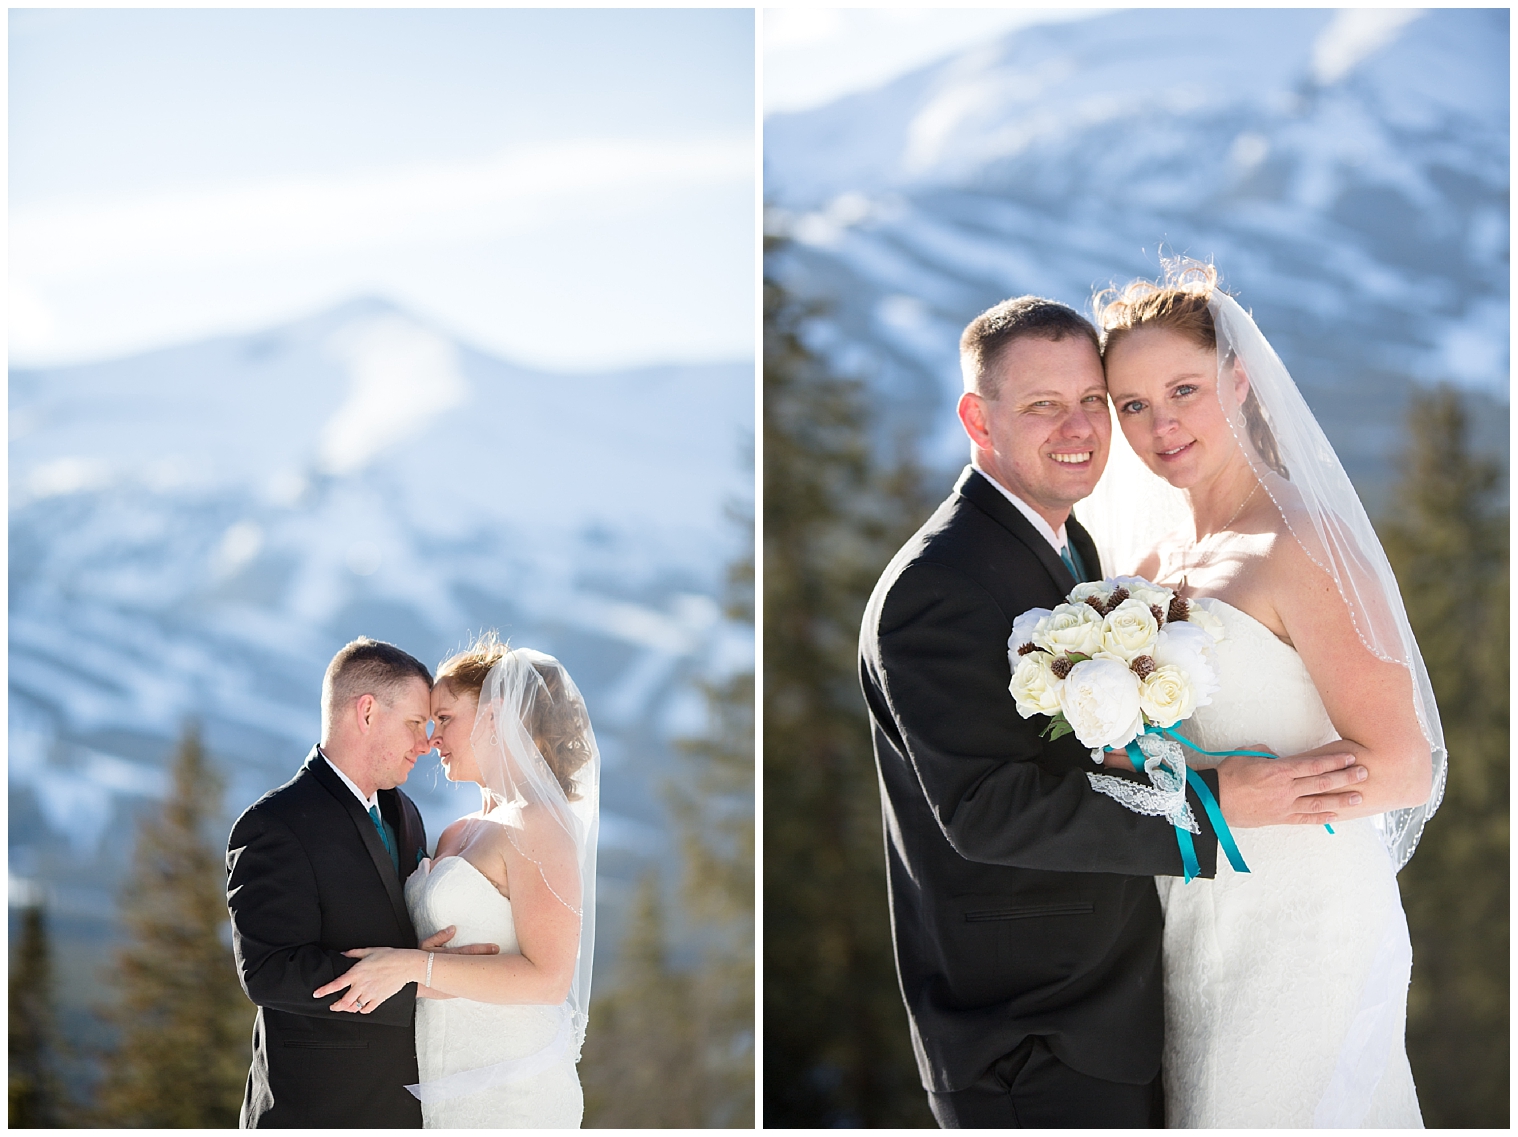 The wedding couple hold each other close in the mountains at their Boreas Pass Breckenridge elopement.